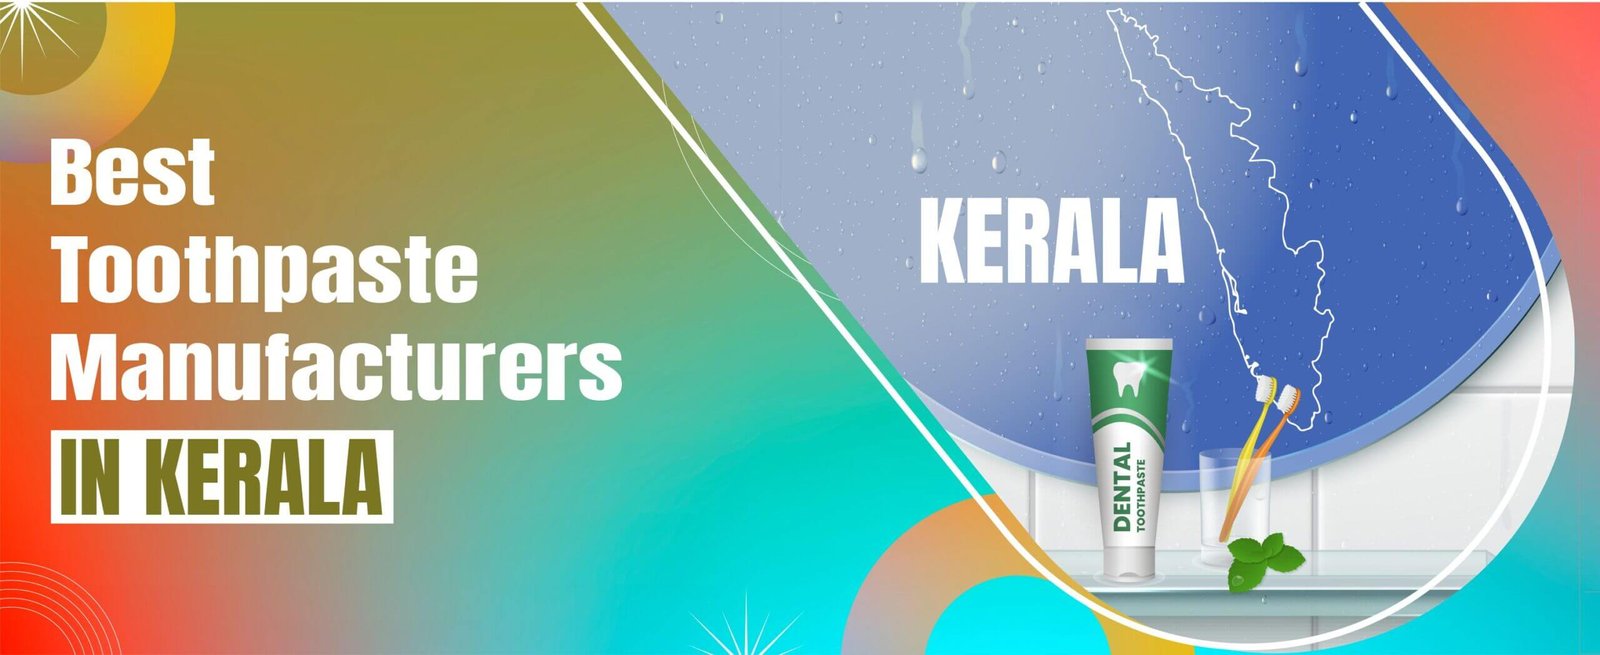 Toothpaste Manufacturers In Kerala